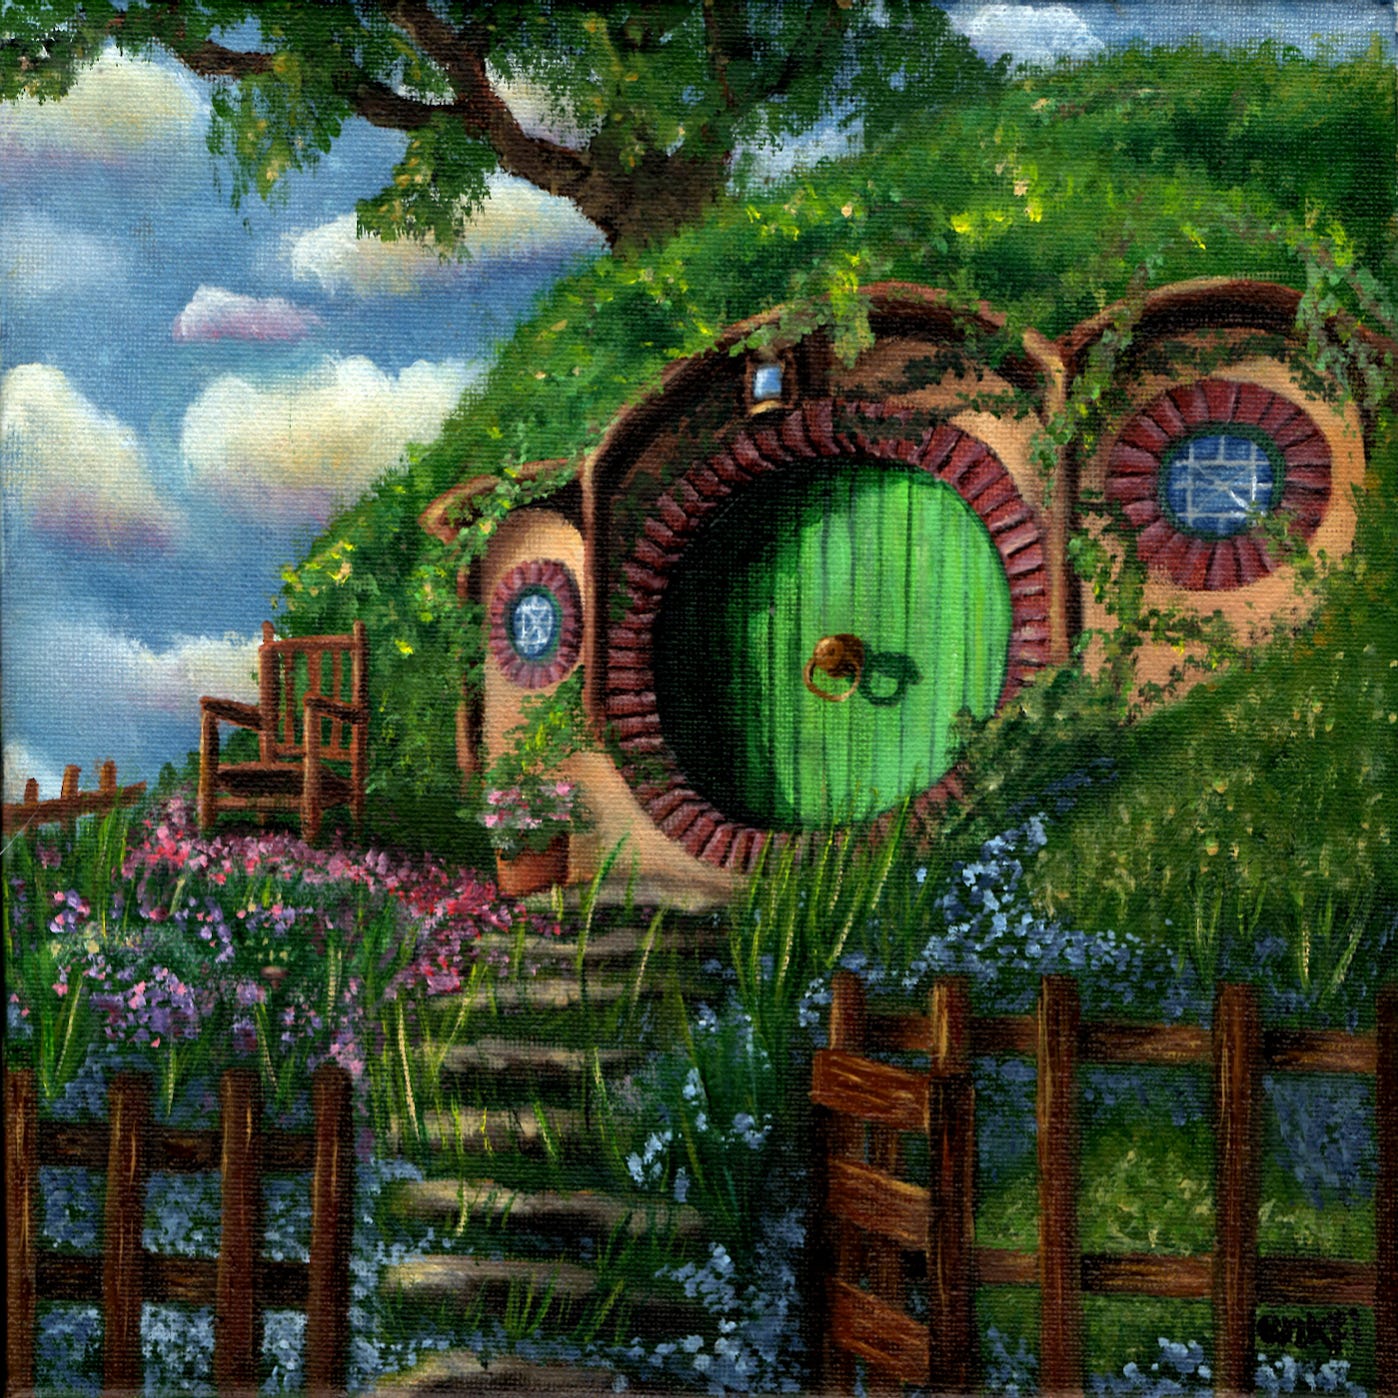 square oil painting of Bag End from The Hobbit/Lord of the Rings by Tolkien. This hobbit-hole is ”not a nasty, dirty, wet hole, filled with the ends of worms and an oozy smell, nor yet a dry, bare, sandy hole with nothing in it to sit down on or to eat: it was a hobbit-hole, and that means comfort. It had a perfectly round door like a porthole, painted green, with a shiny yellow brass knob in the exact middle.” On each side of the door are circular windows. It is golden hour, there are lots of flowers and grass, a rock path leading up to the door, and there is a wooden chair to the left of the door with a flowerpot next to it. There is a wooden fence encircling the property and an open wooden gate. There is also a tree behind the hill and you can see the blue sky and some clouds.